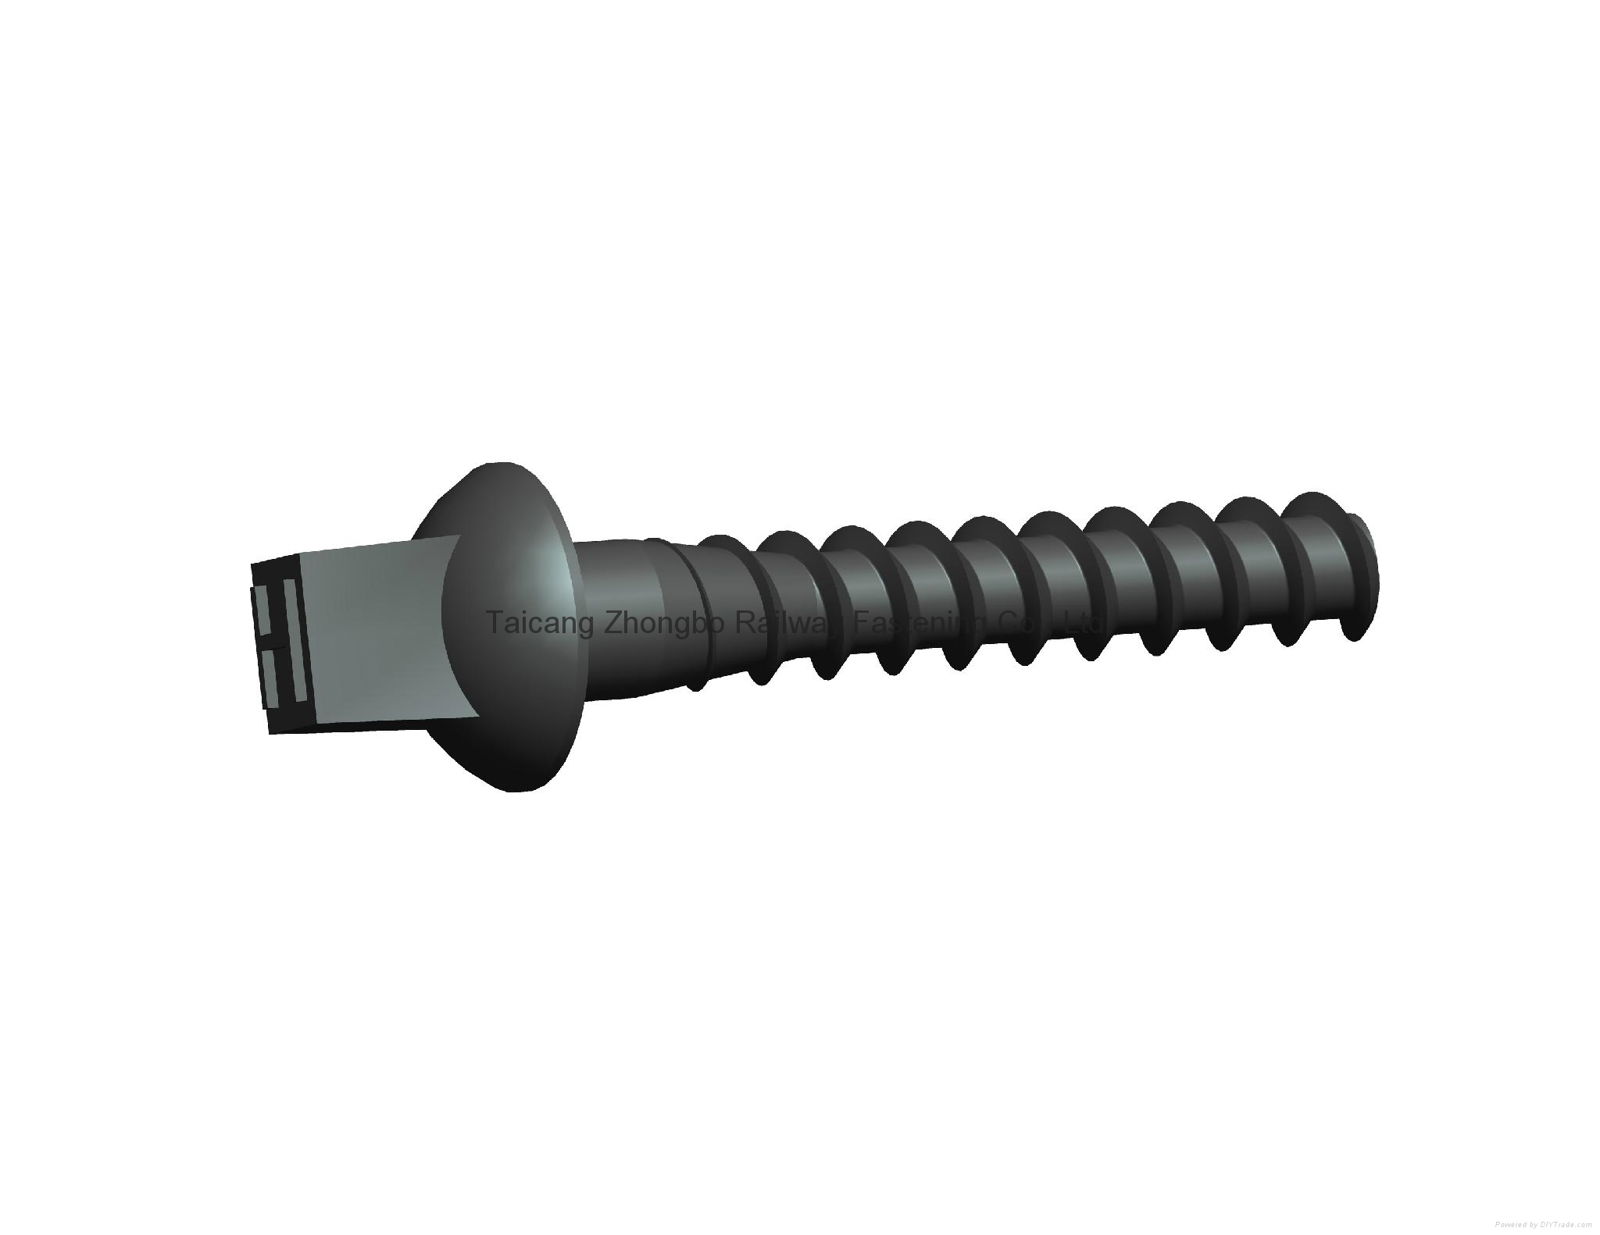 Screw spikes used in tie plates